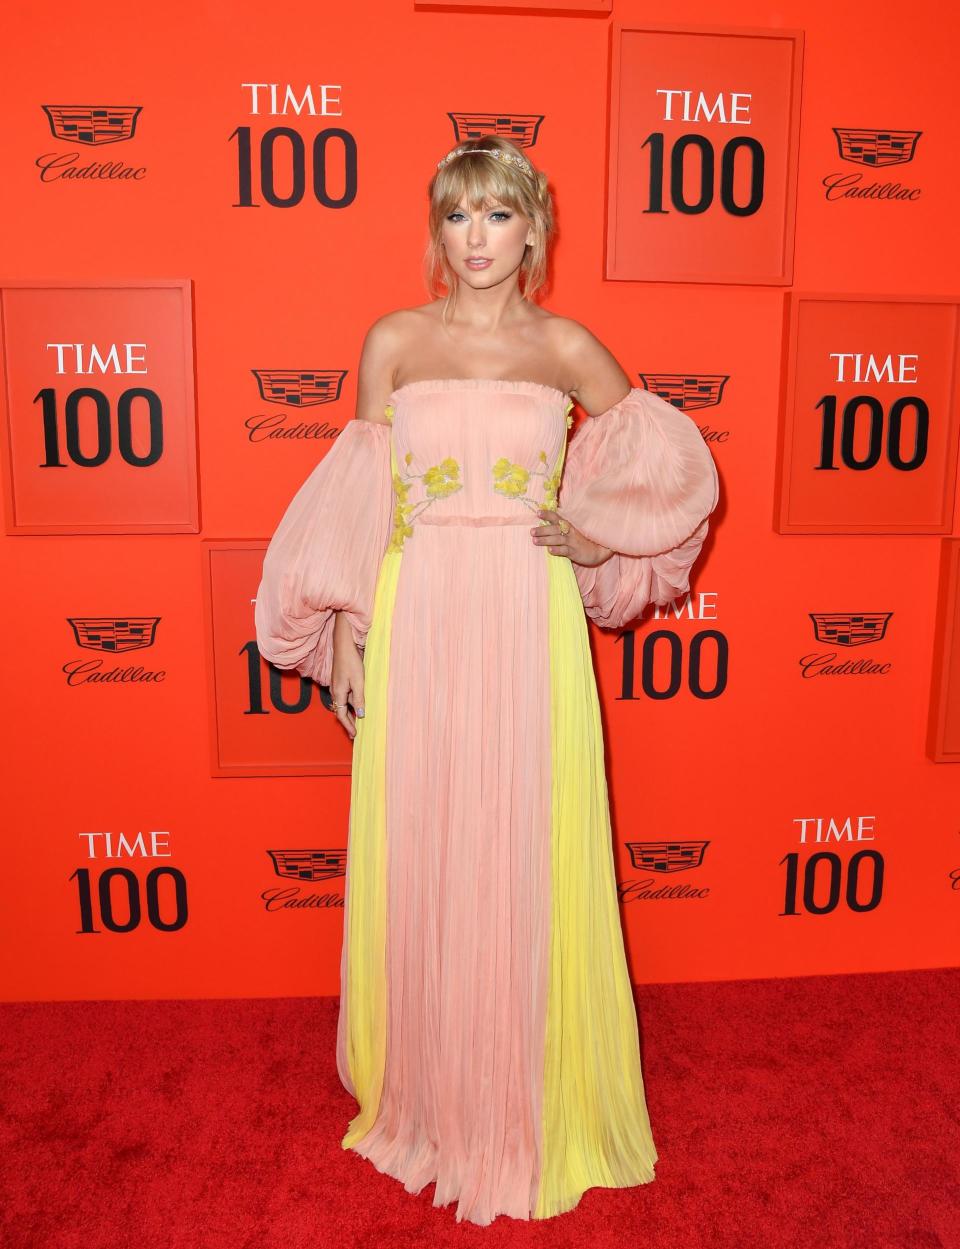 Taylor Swift arrives on the red carpet for the Time 100 Gala (AFP/Getty Images)